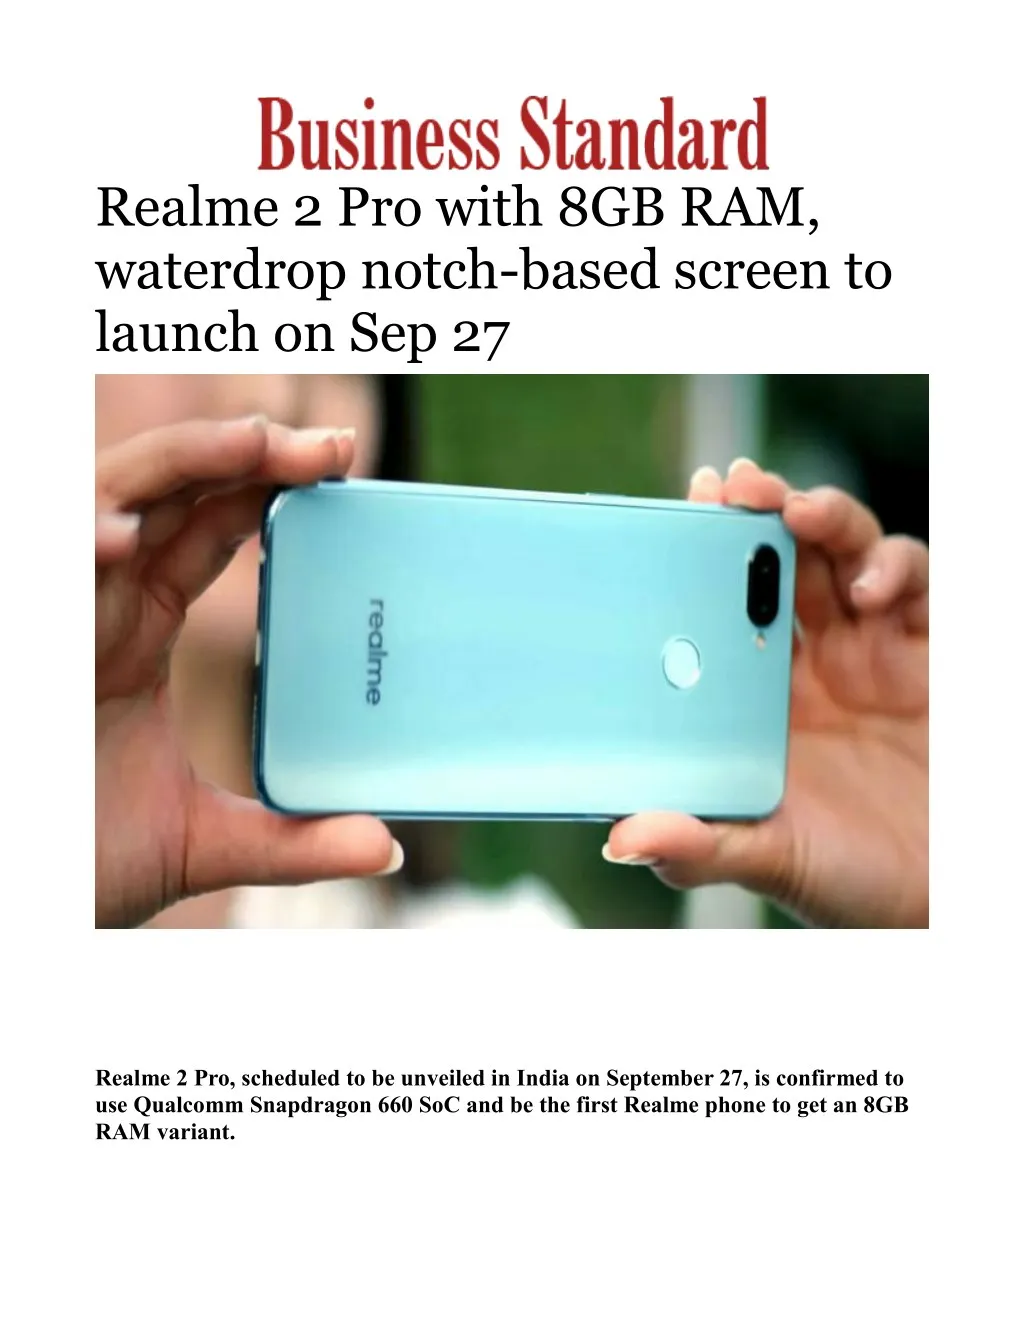 realme 2 pro with 8gb ram waterdrop notch based